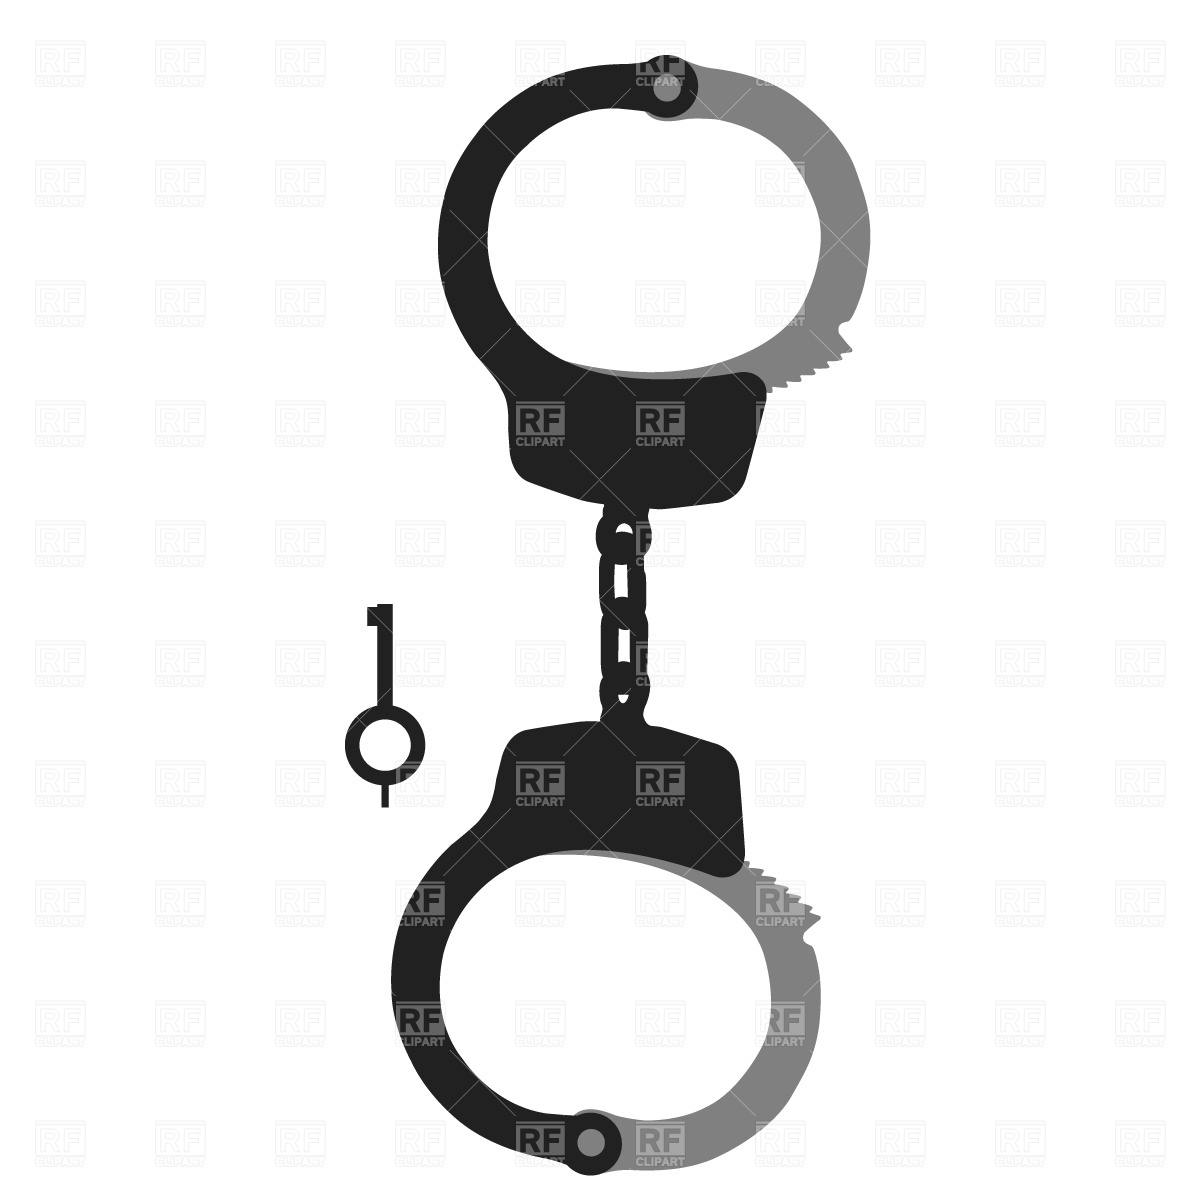 Criminality 20clipart | Clipart Panda - Free Clipart Images